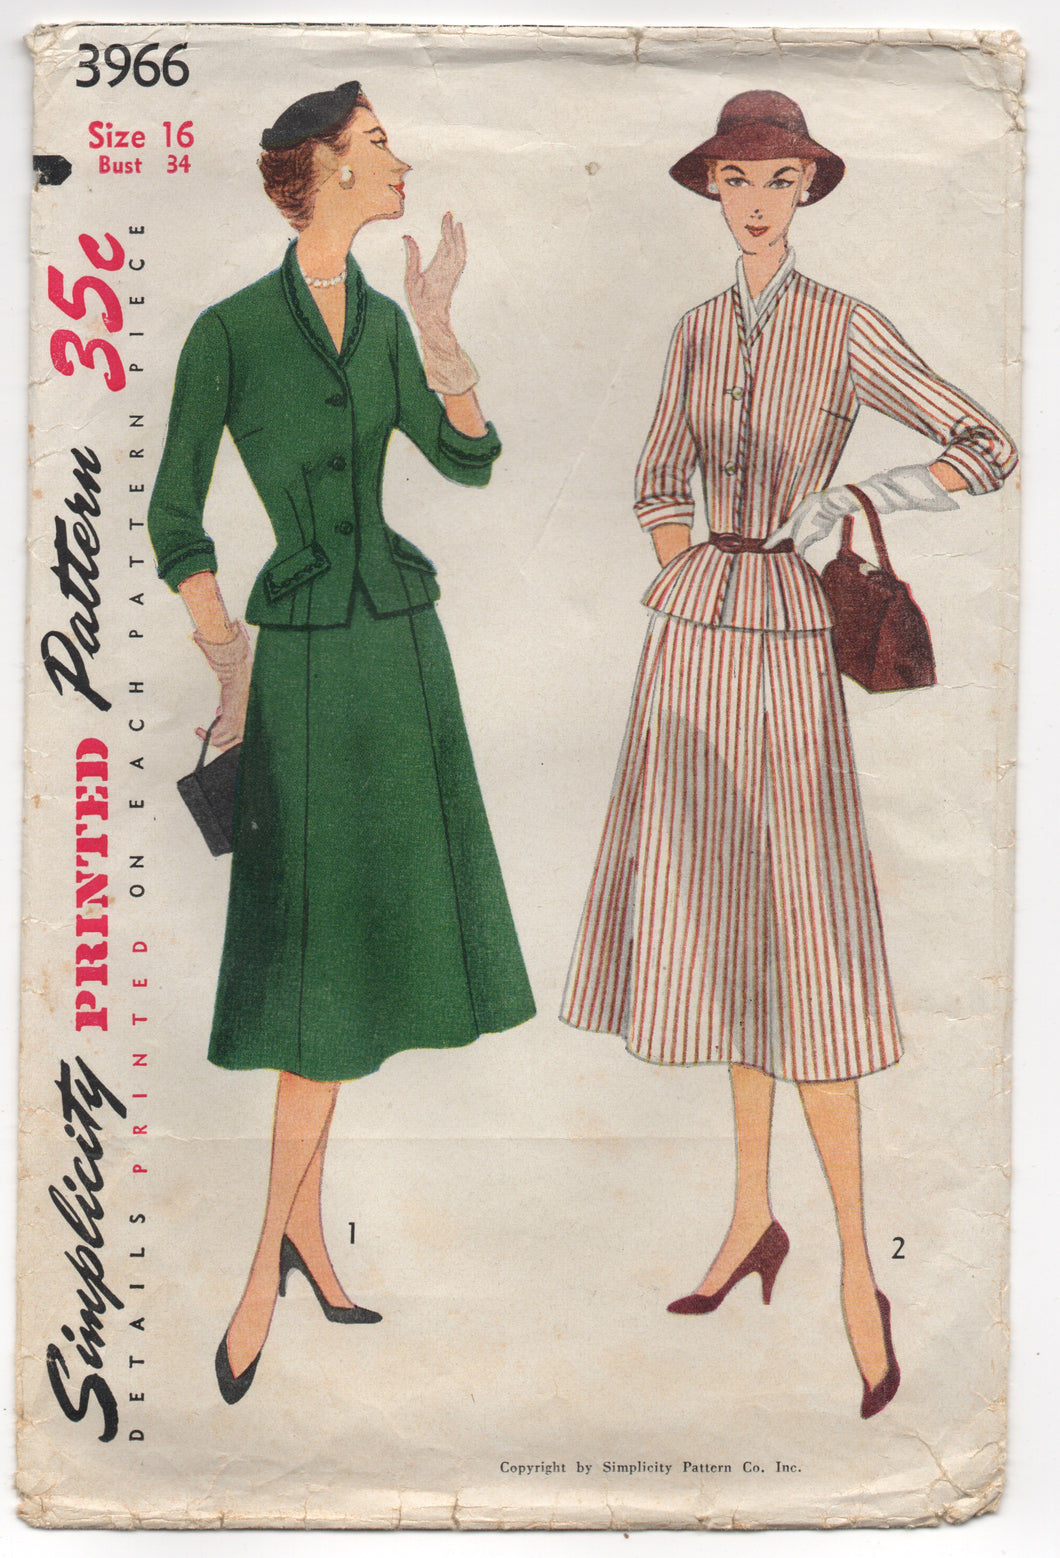 1950's Simplicity Two Piece Suit Dress with Cuffed Jacket - Bust 34